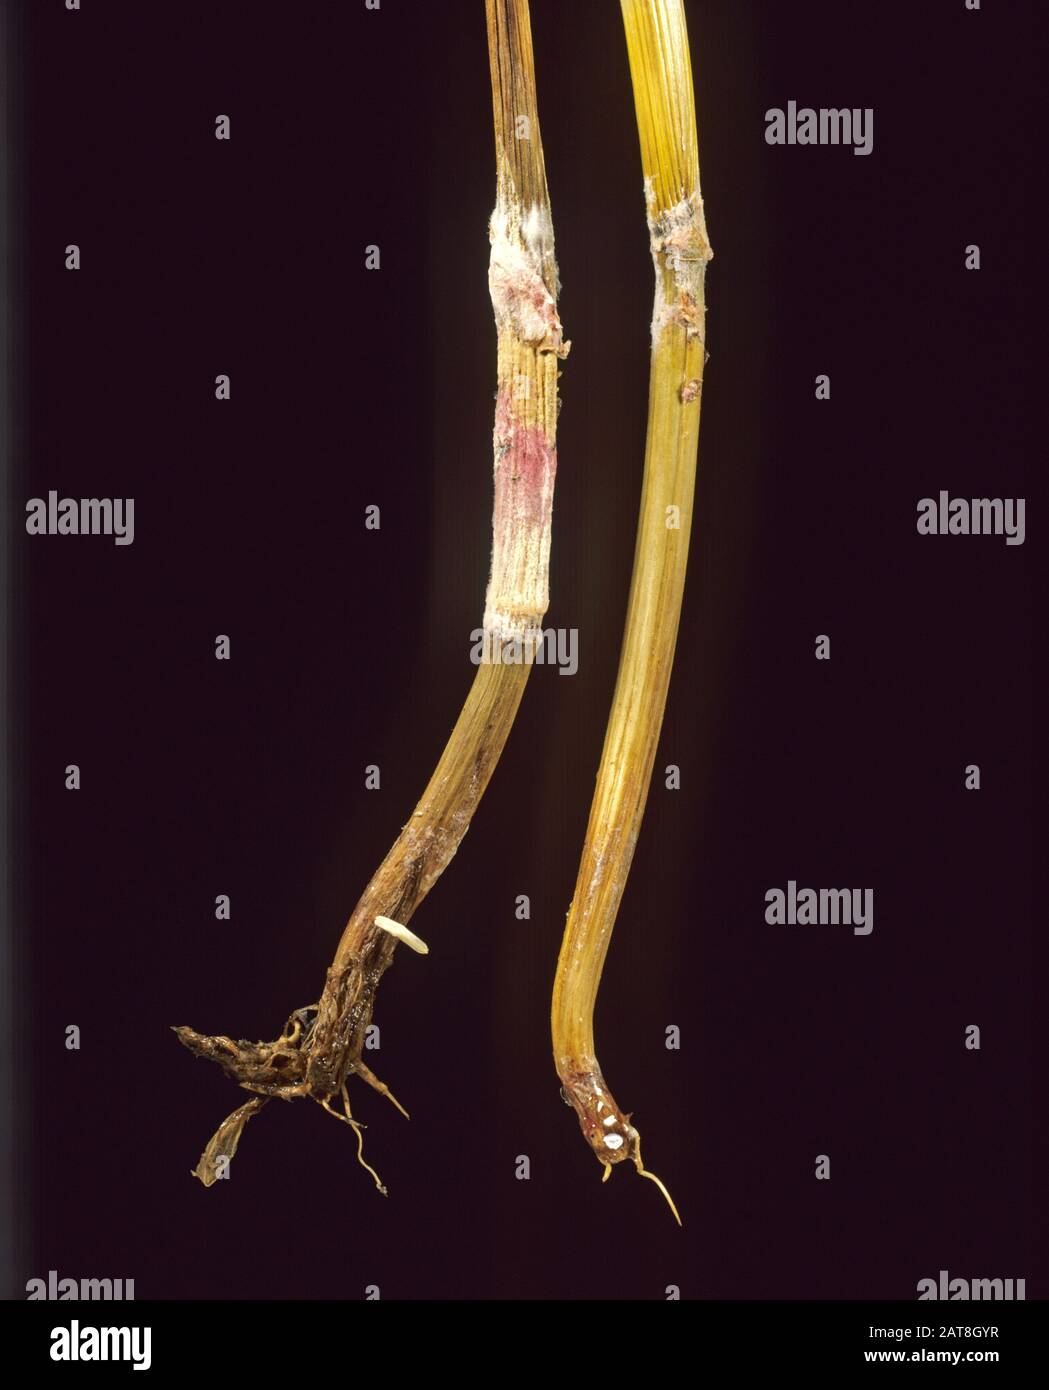 Fusarium foot rot (Fusarium) with pink mycelium and damage to barley stem base in a crop in ear Stock Photo